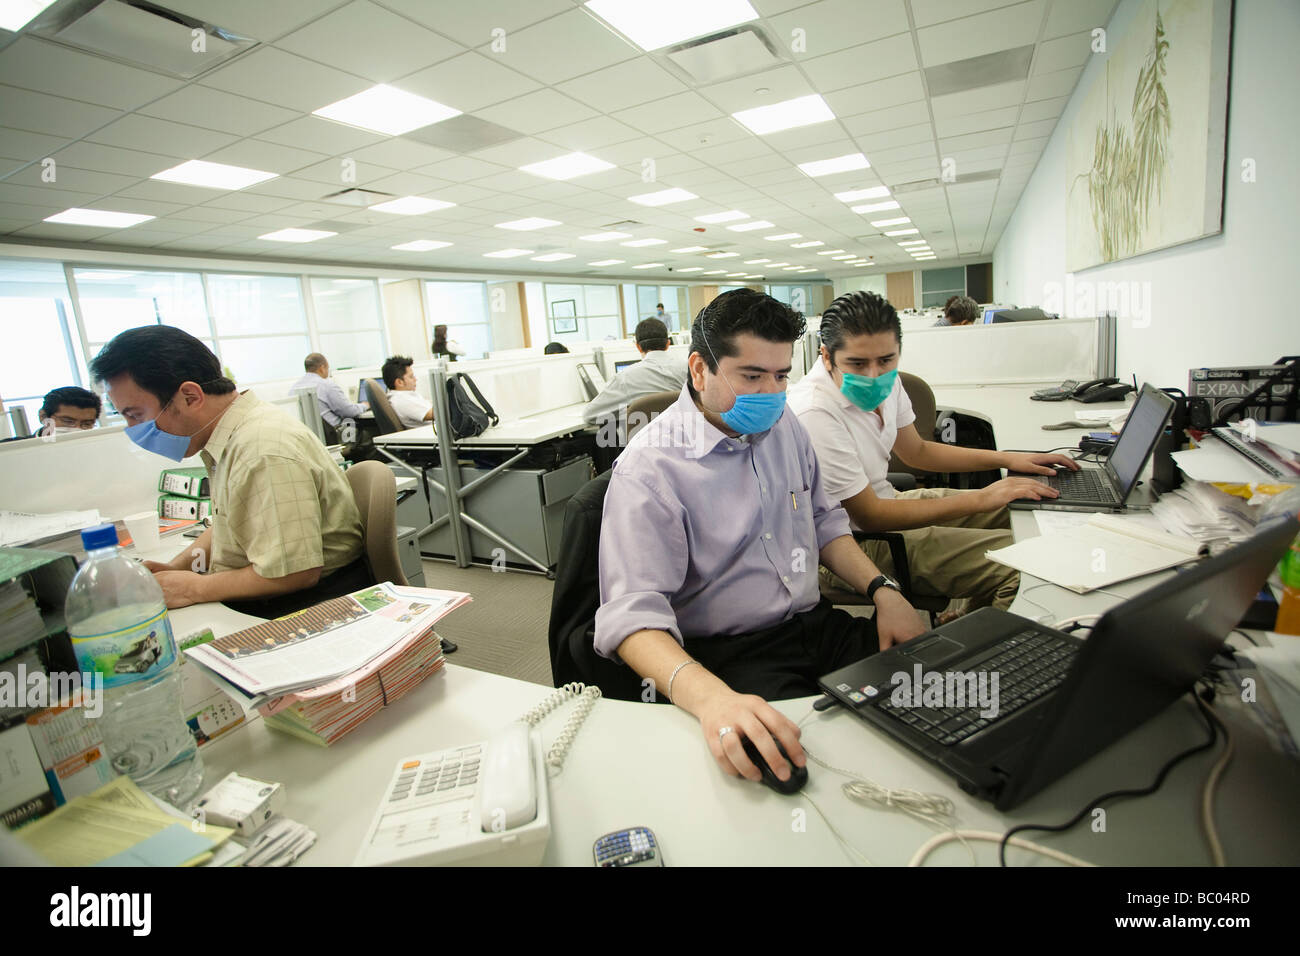 Some people work at their computers wearing masks inside an office during the swine flu epidemic in Mexico City, DF, Mexico. Stock Photo